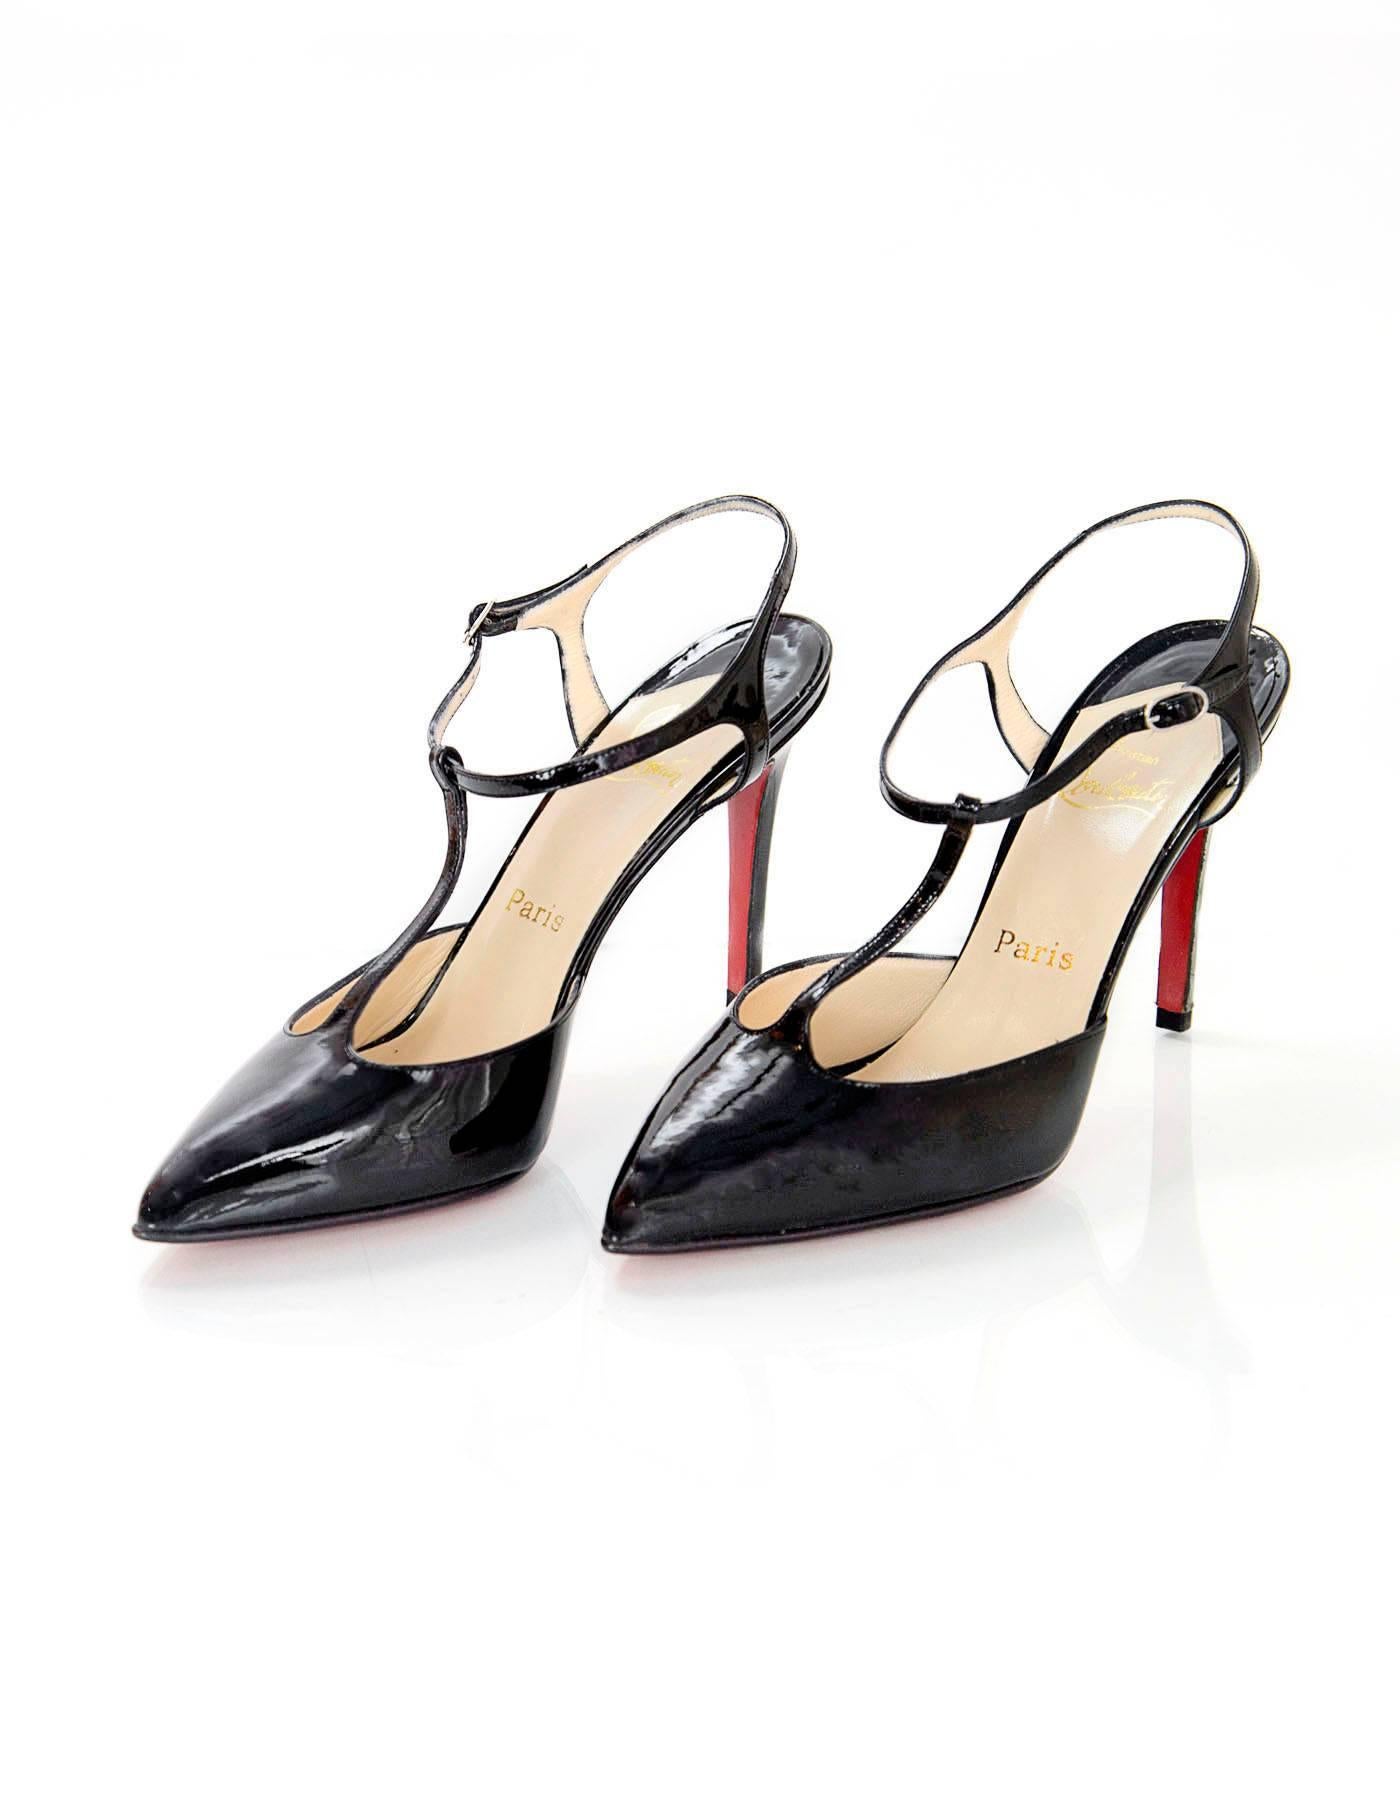 Christian Louboutin NEW Black Patent Coxinelle T-Strap Pumps 

Made In: Italy
Color: Black
Materials: Patent leather
Closure/Opening: T-strap with ankle buckle and notch
Sole Stamp: Christian Louboutin Vero Cuoio Made in Italy 37 1/2
Overall